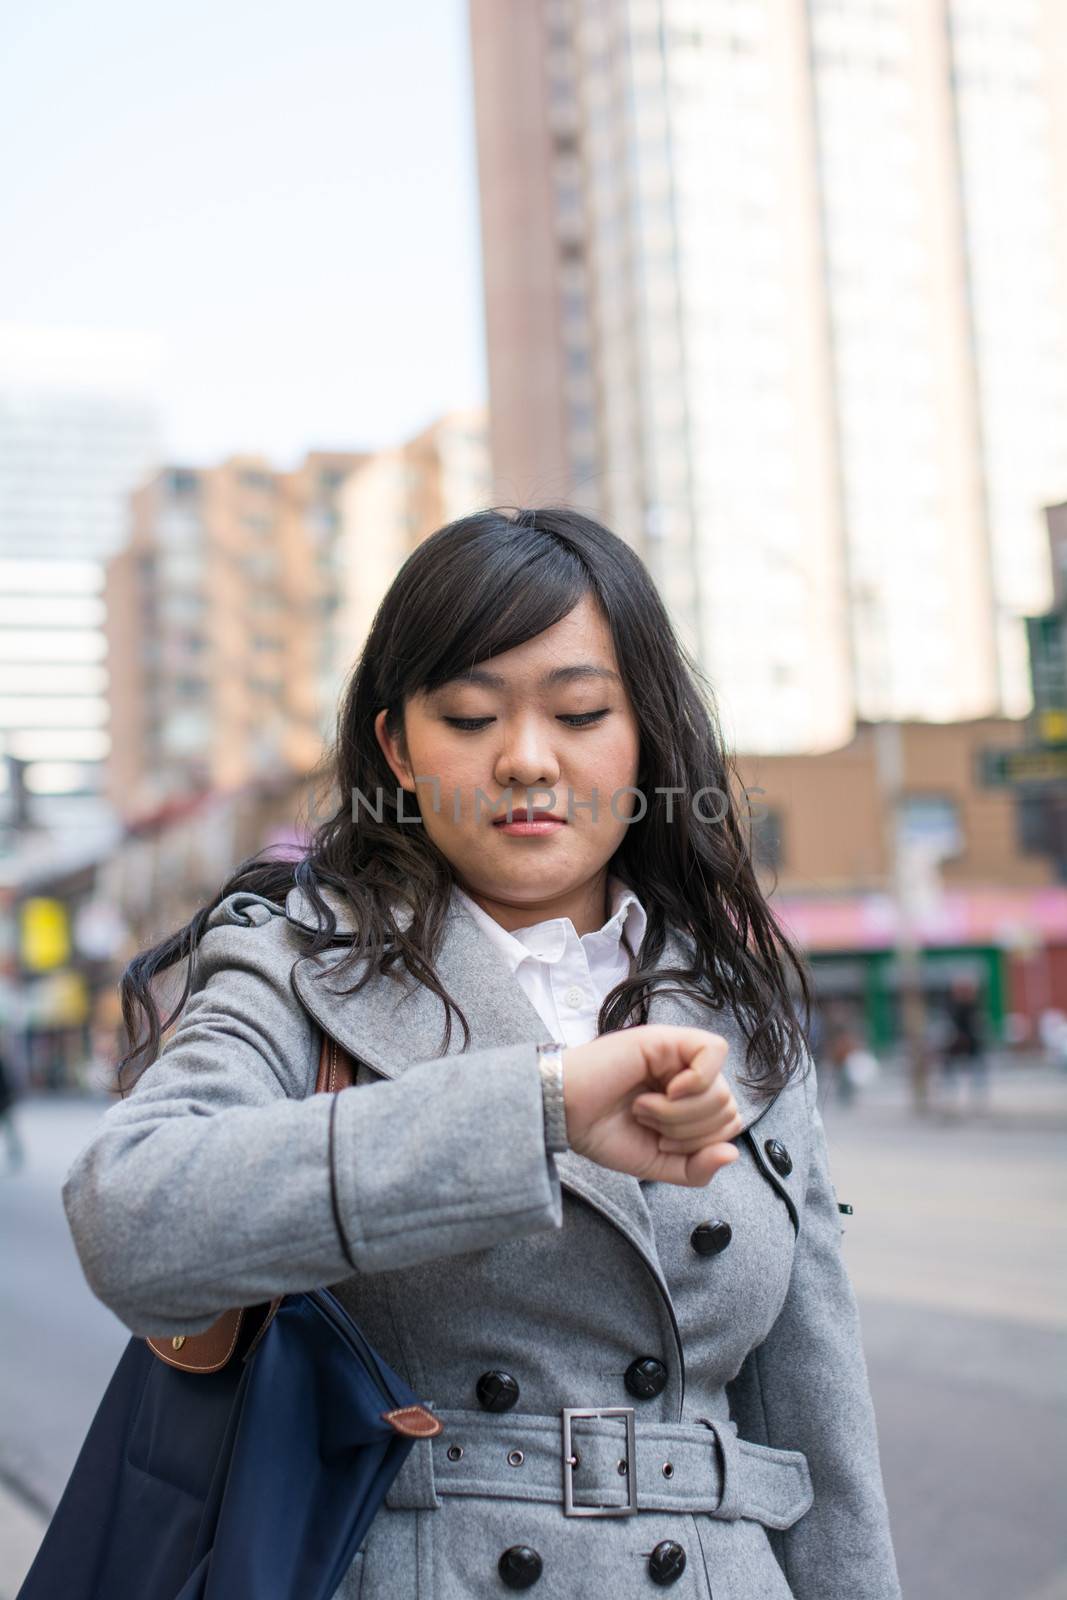 Young Asian woman checking her watch on a street in a large city